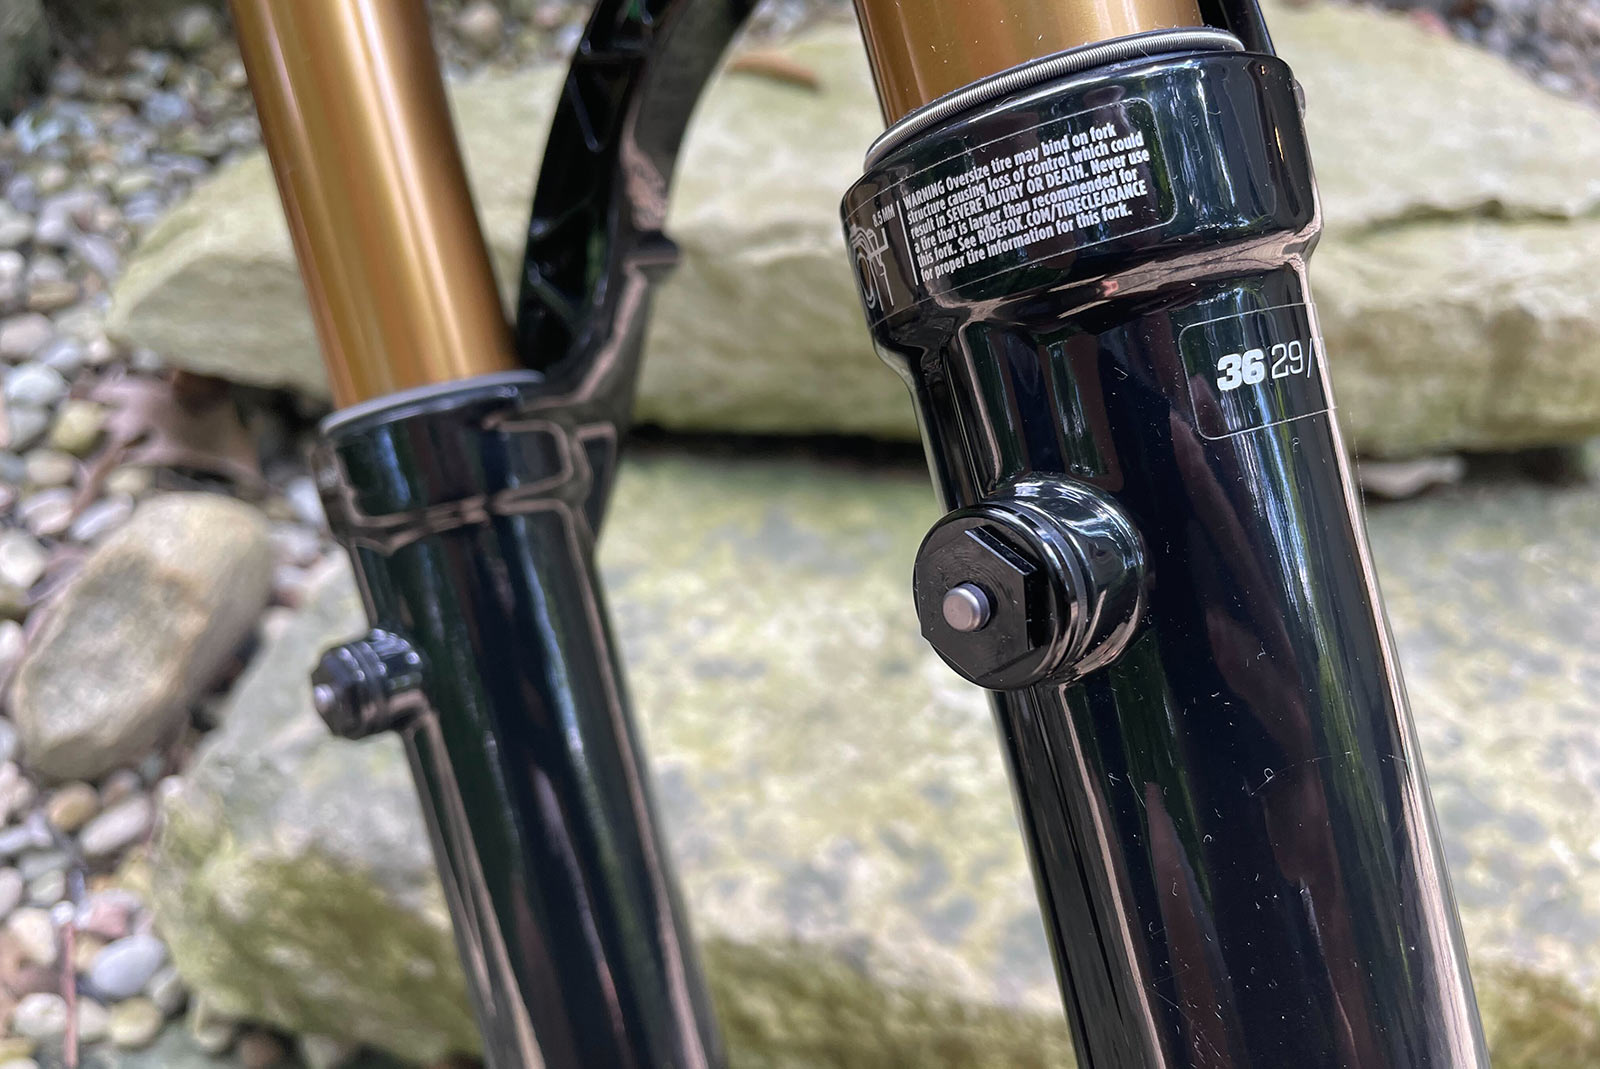 fox sues sram for use of pressure relief valves on rockshox forks